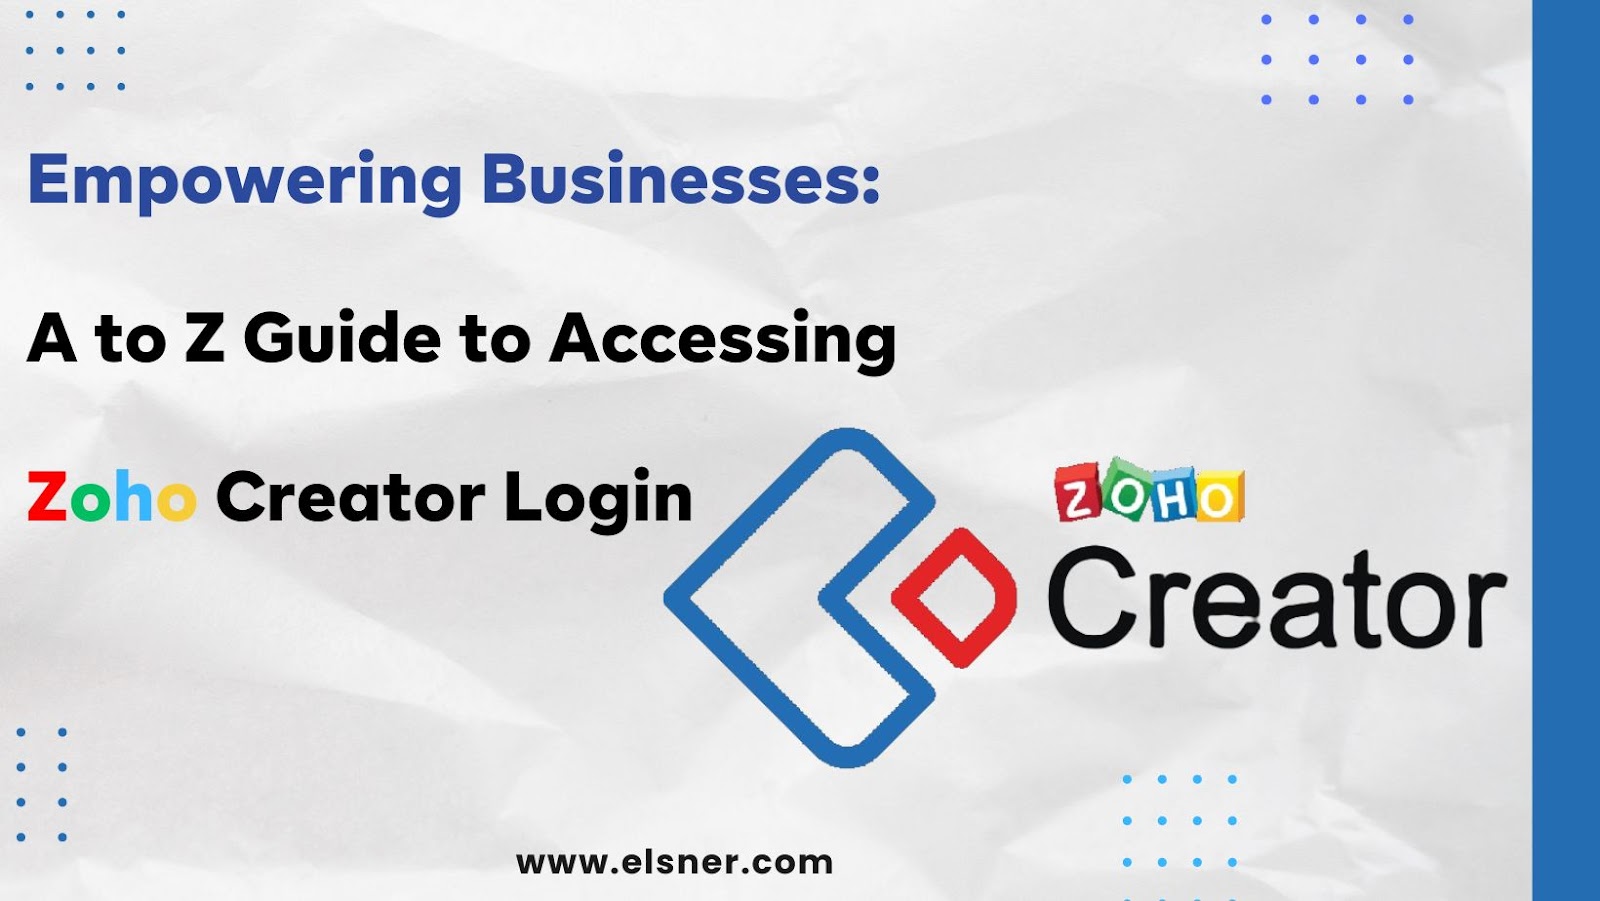 Elsner Empowering Businesses: A to Z Guide to Accessing Zoho Creator Login